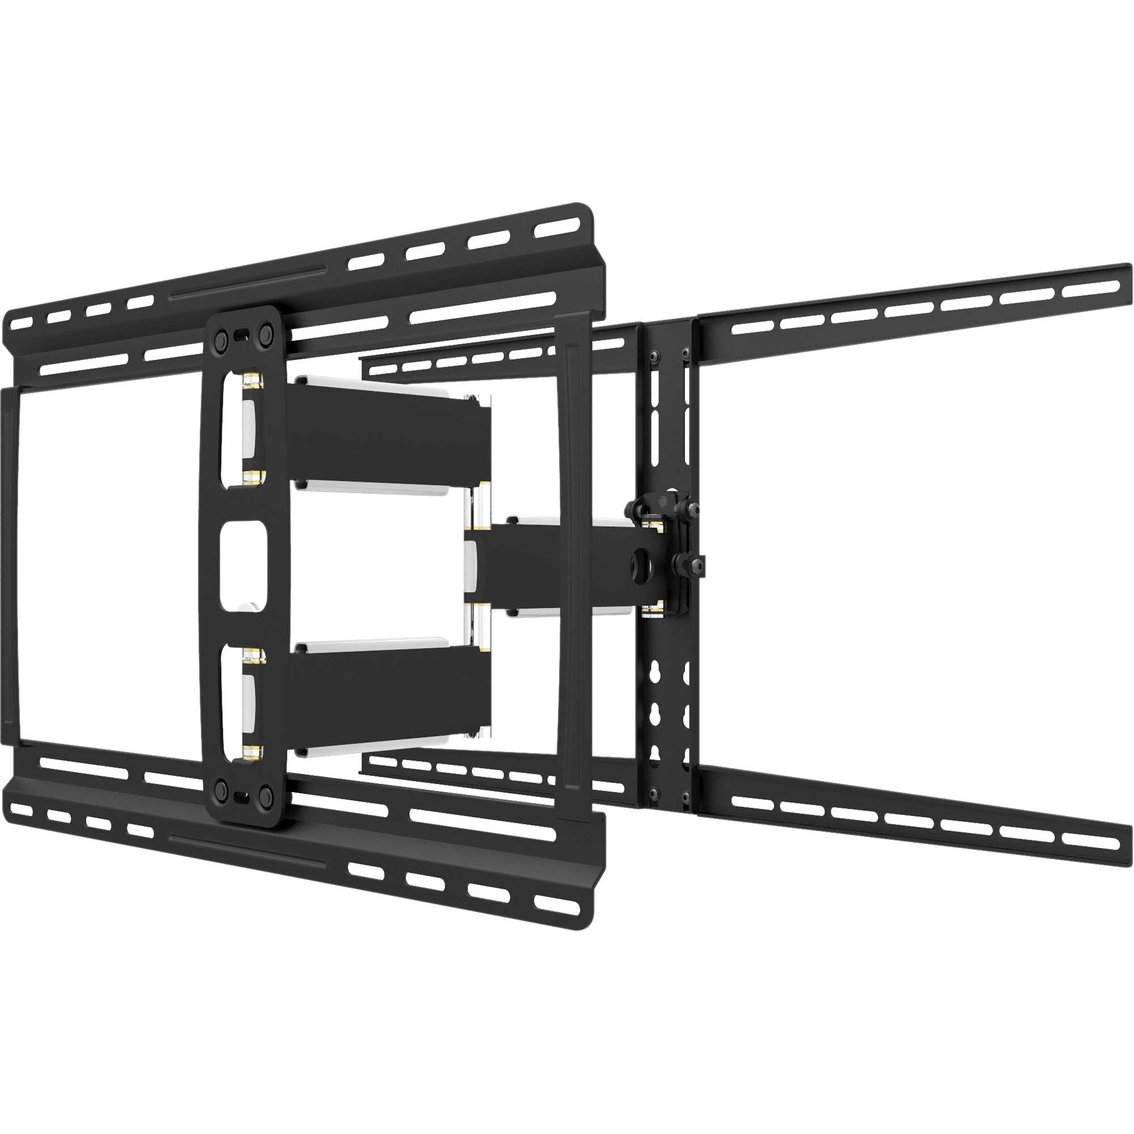 ProMounts Pro Full Motion TV Wall Mount for 37 to 85 in. TVs up to 120 lb. - Image 10 of 10